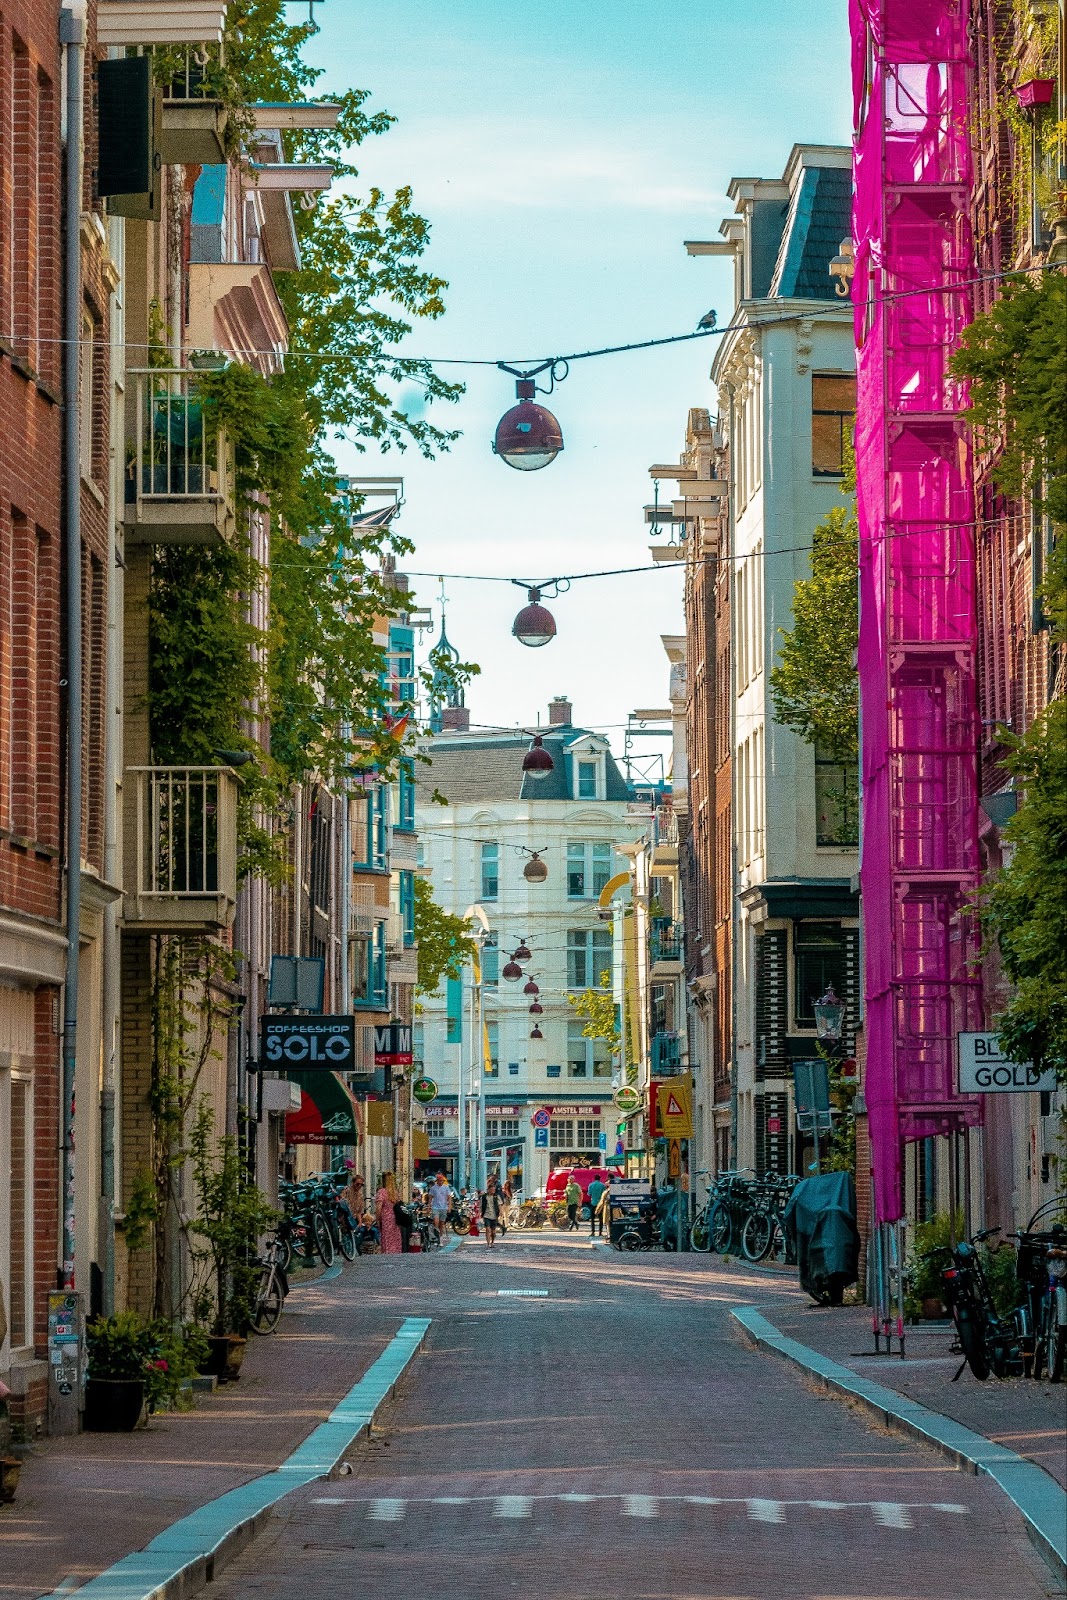 Cobblestone stone streets, cozy cafes, and quirky boutiques add character to Amsterdam neighborhoods.